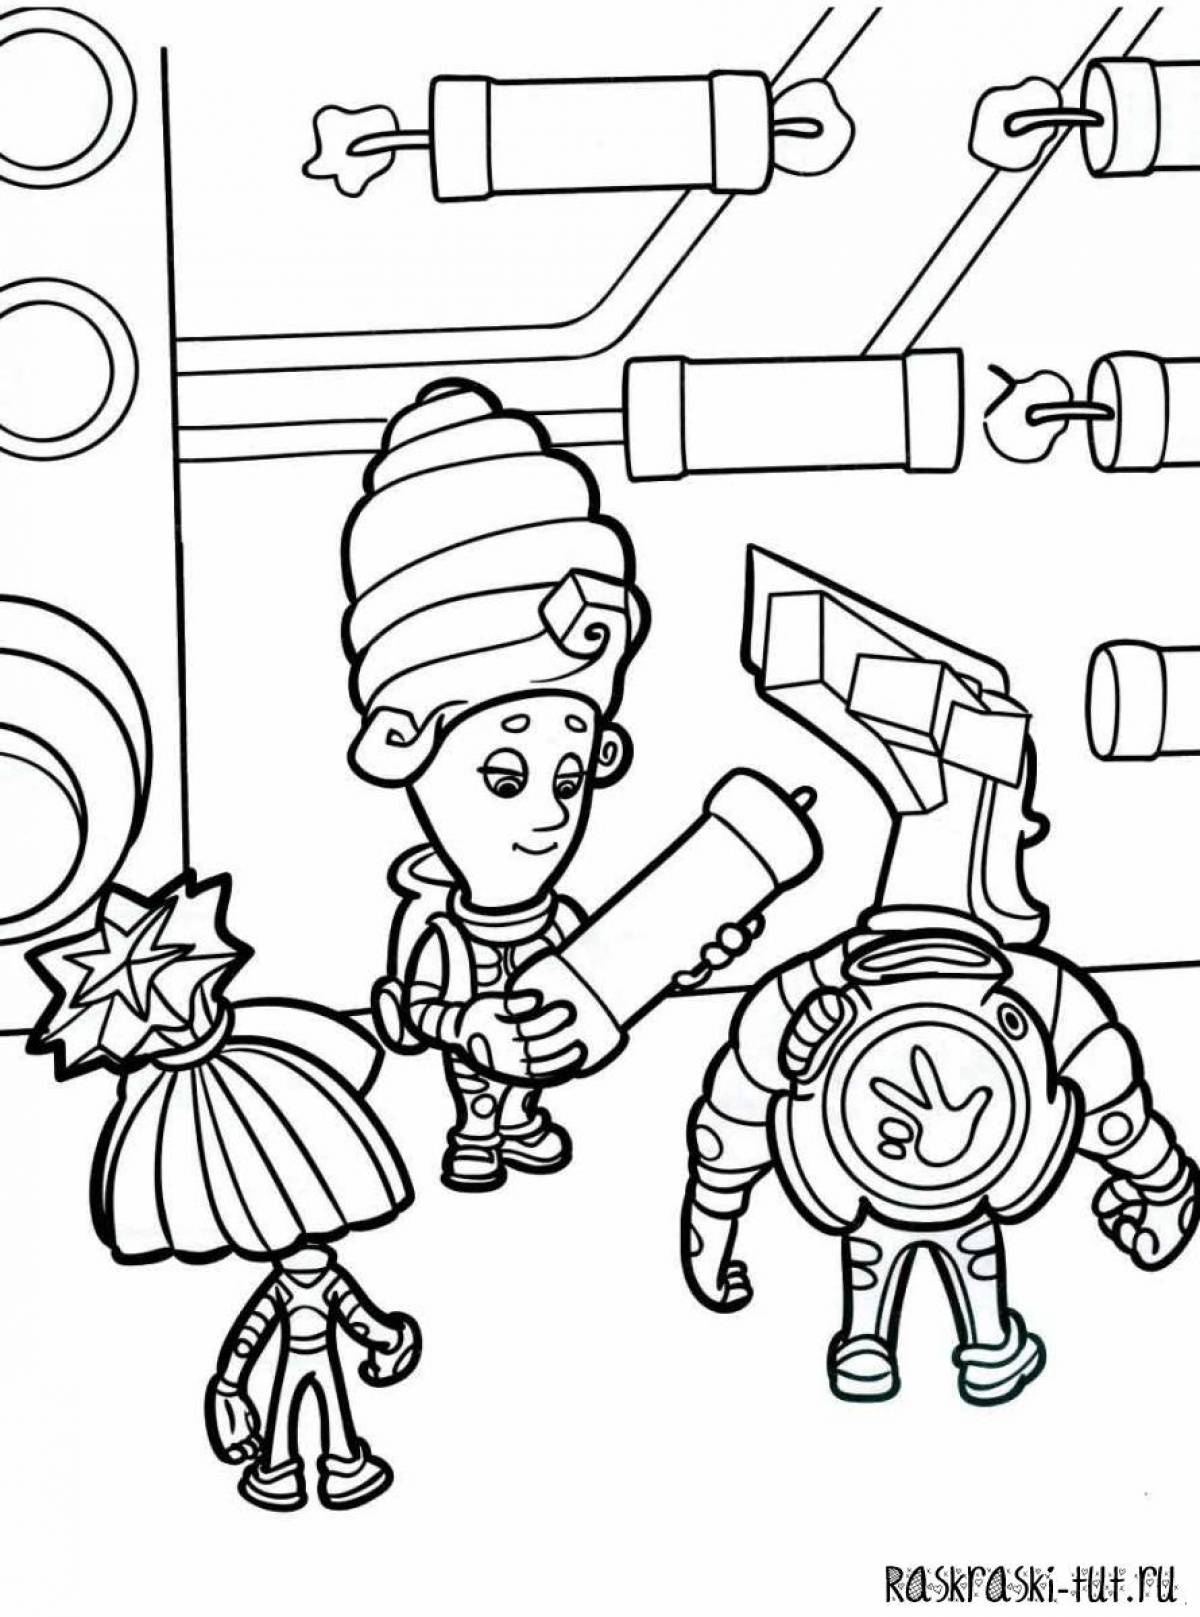 Turn on the Fixies Vibrant Coloring Page